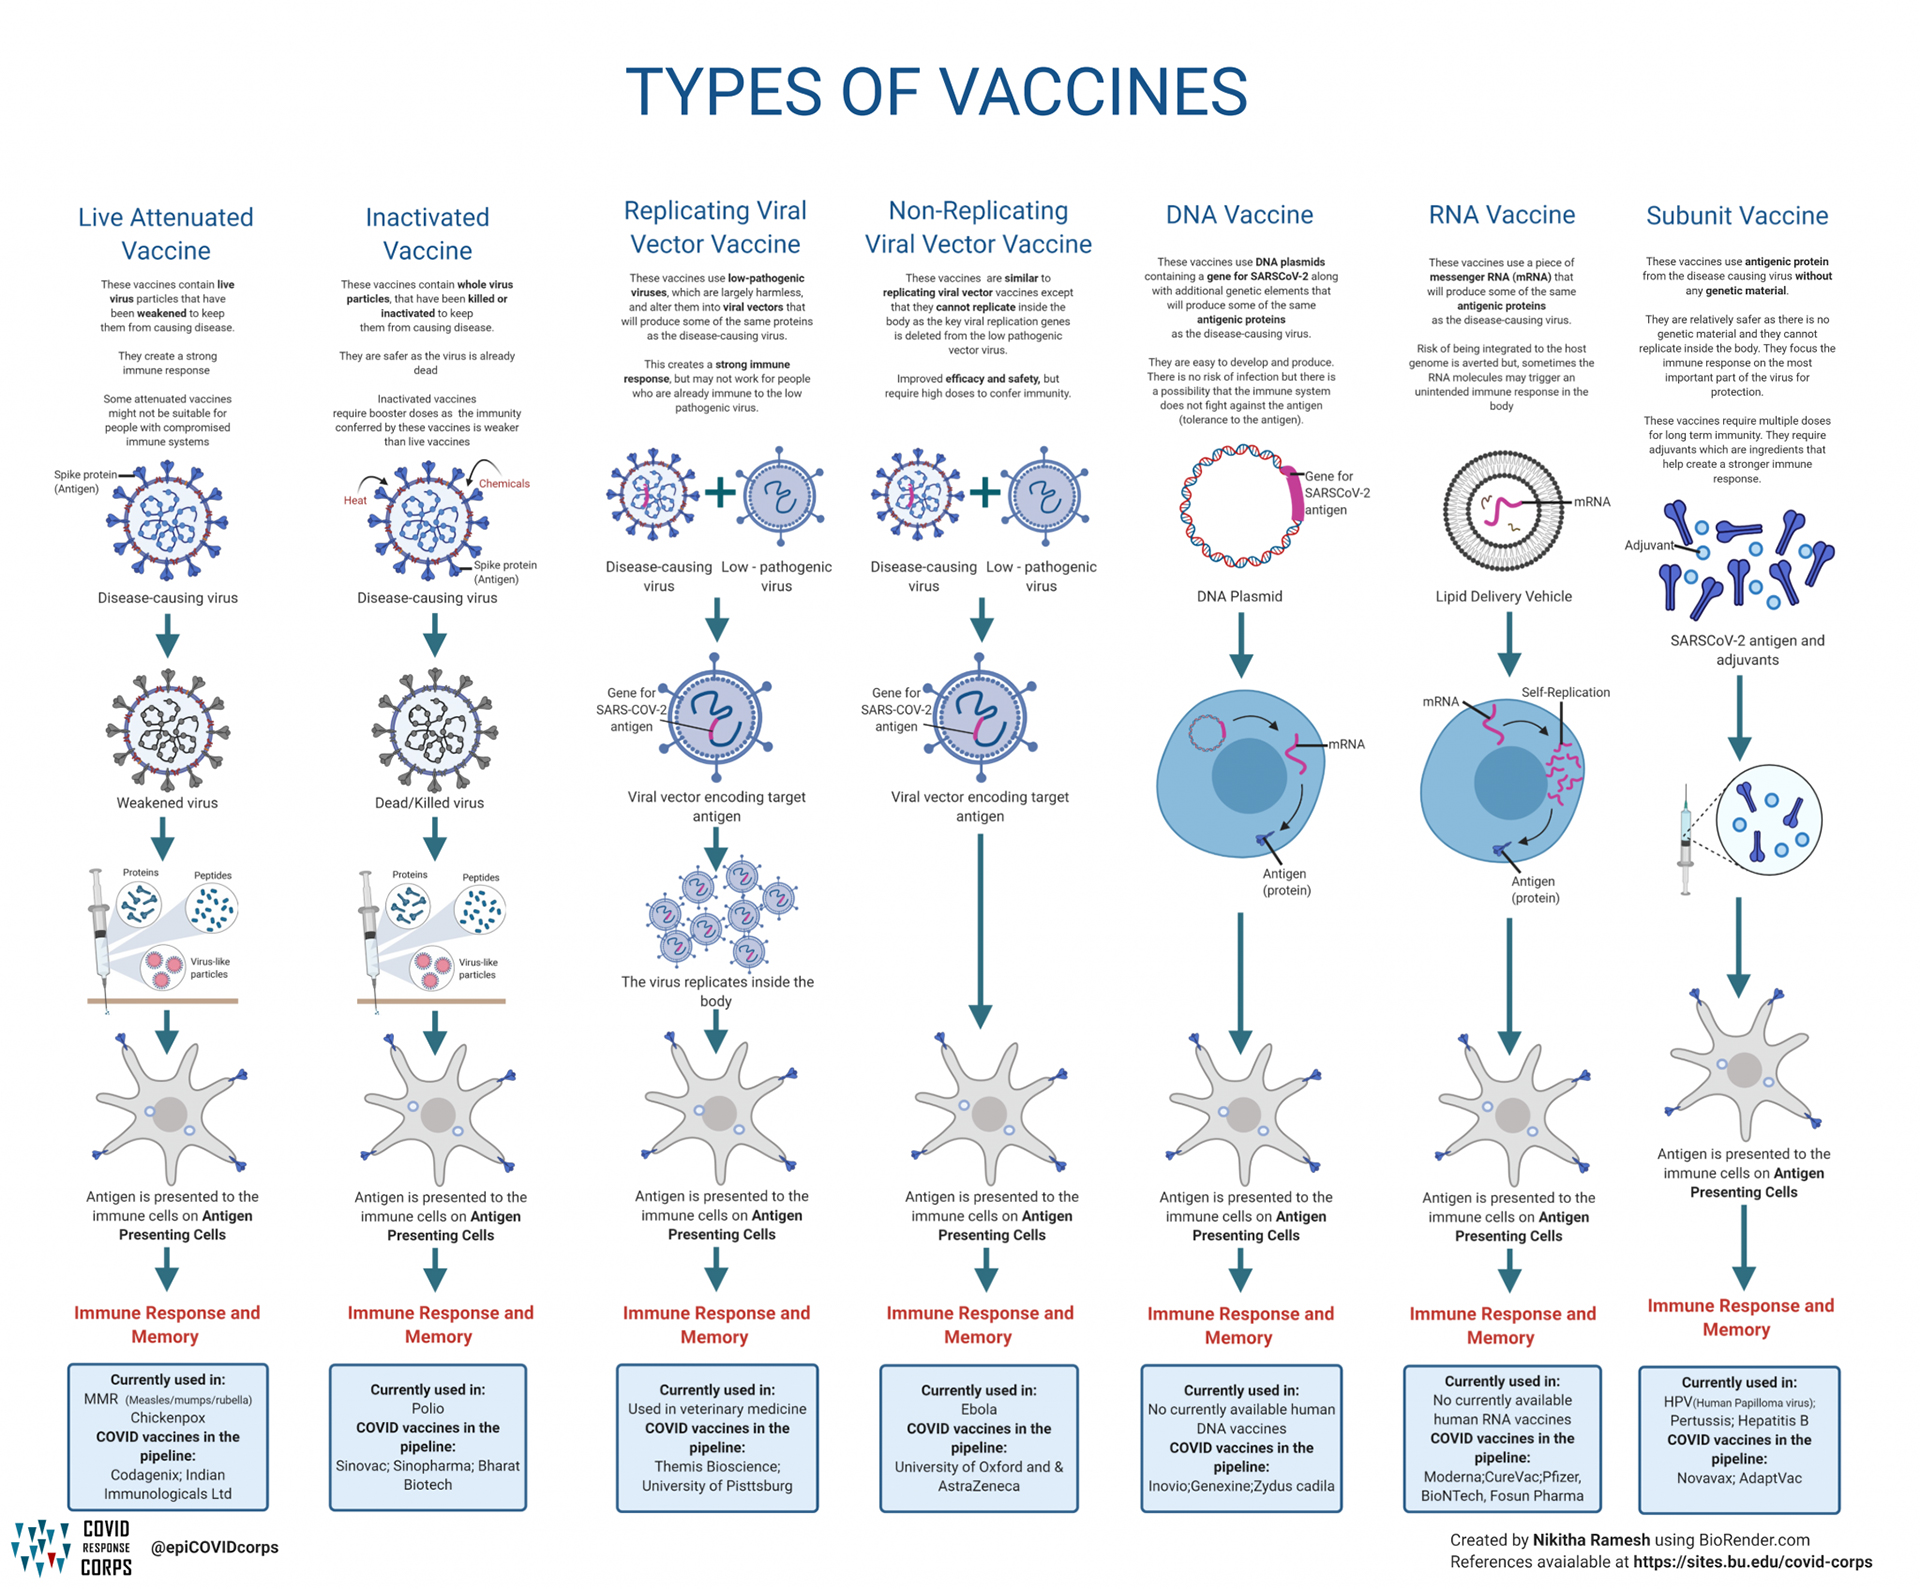 covid-19-types-of-vaccines-epicovidcorps-hd.jpg